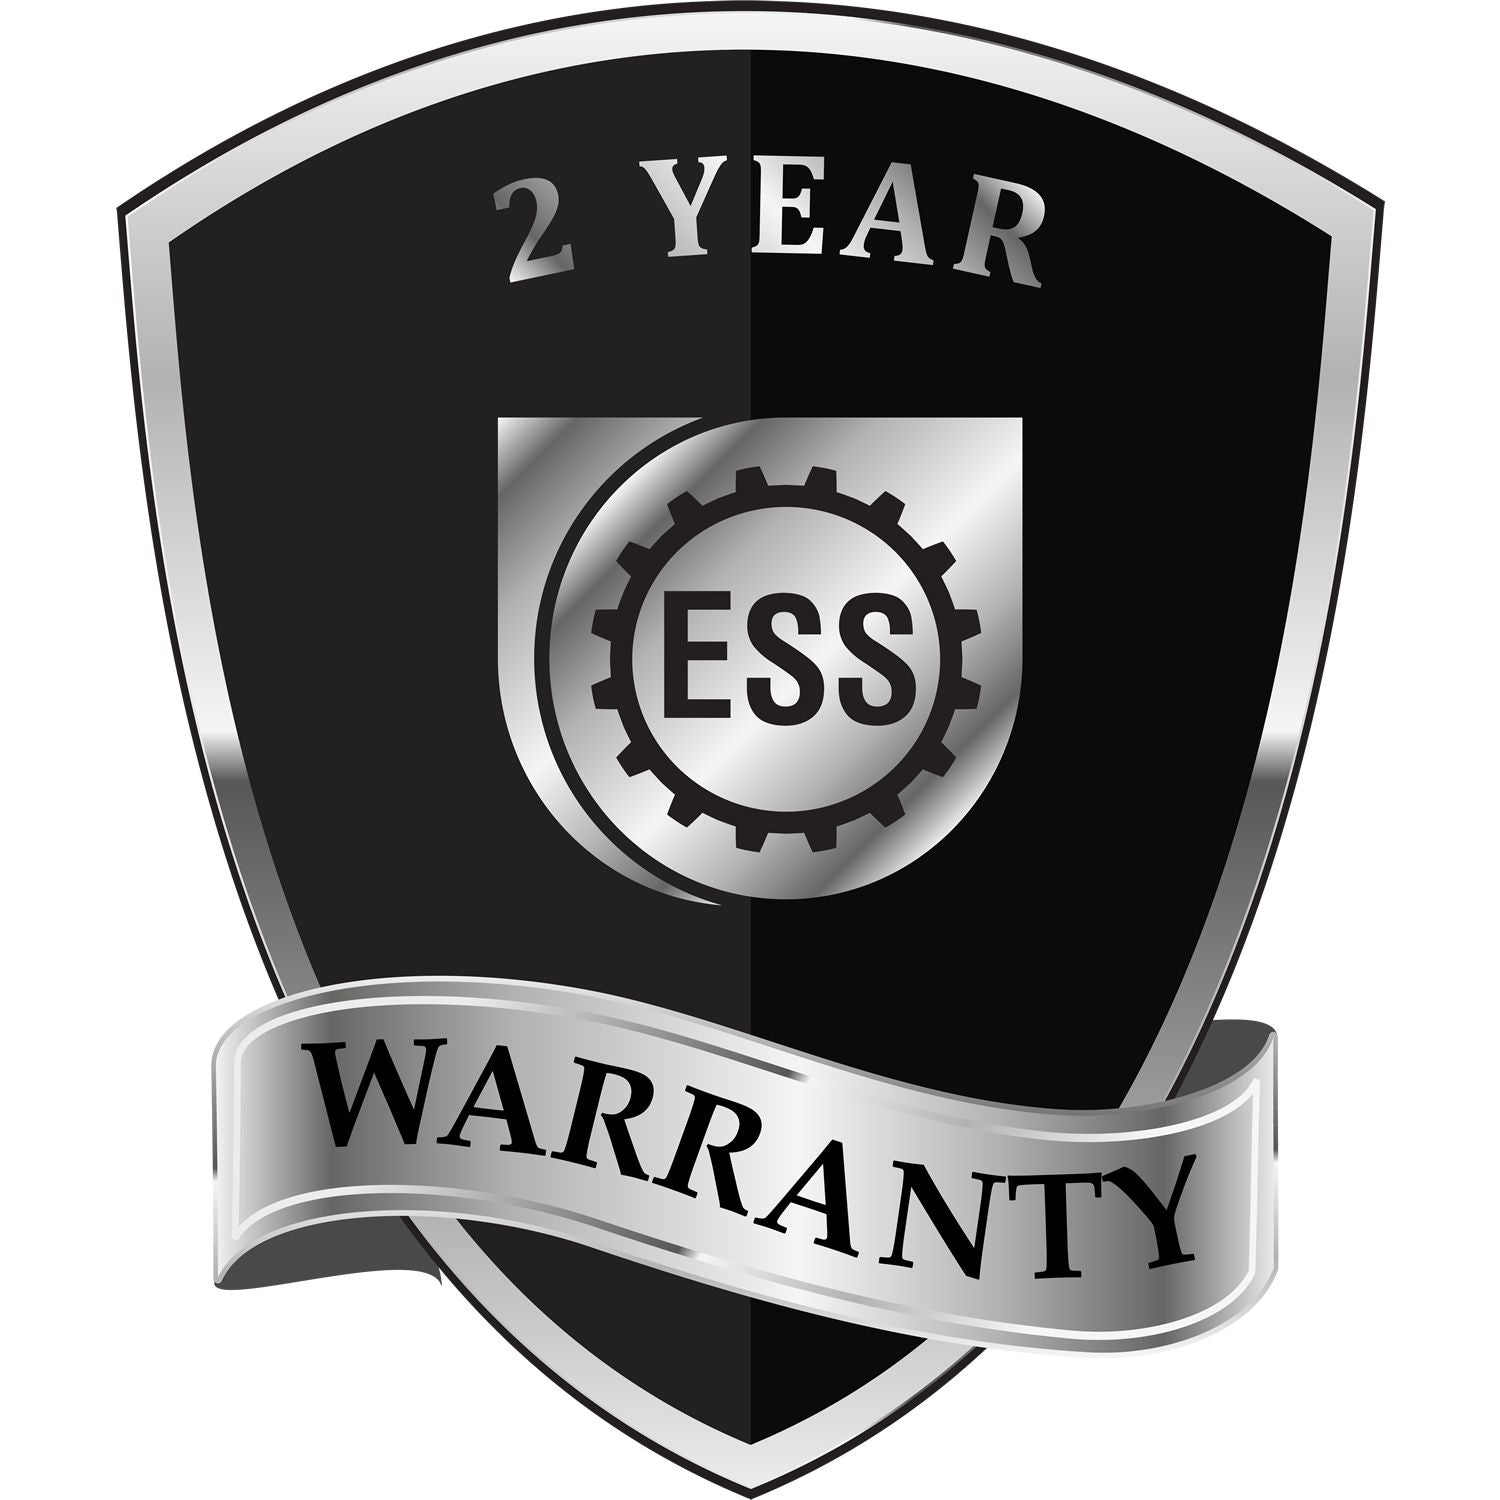 A black and silver badge or emblem showing warranty information for the Gift North Carolina Architect Seal